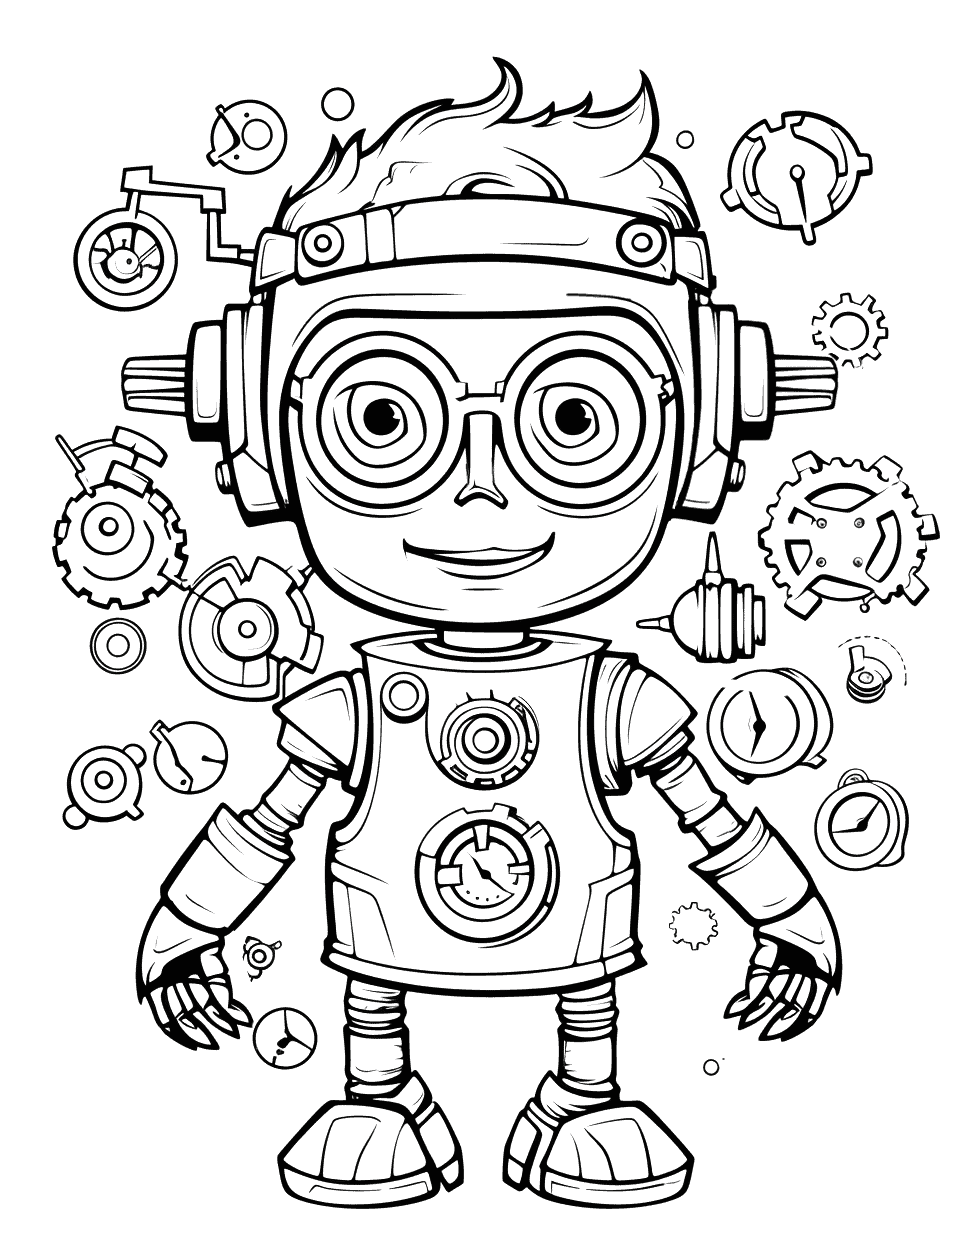 Time-Traveling Robot Adventure Coloring Page - A robot surrounded by clocks and gears.